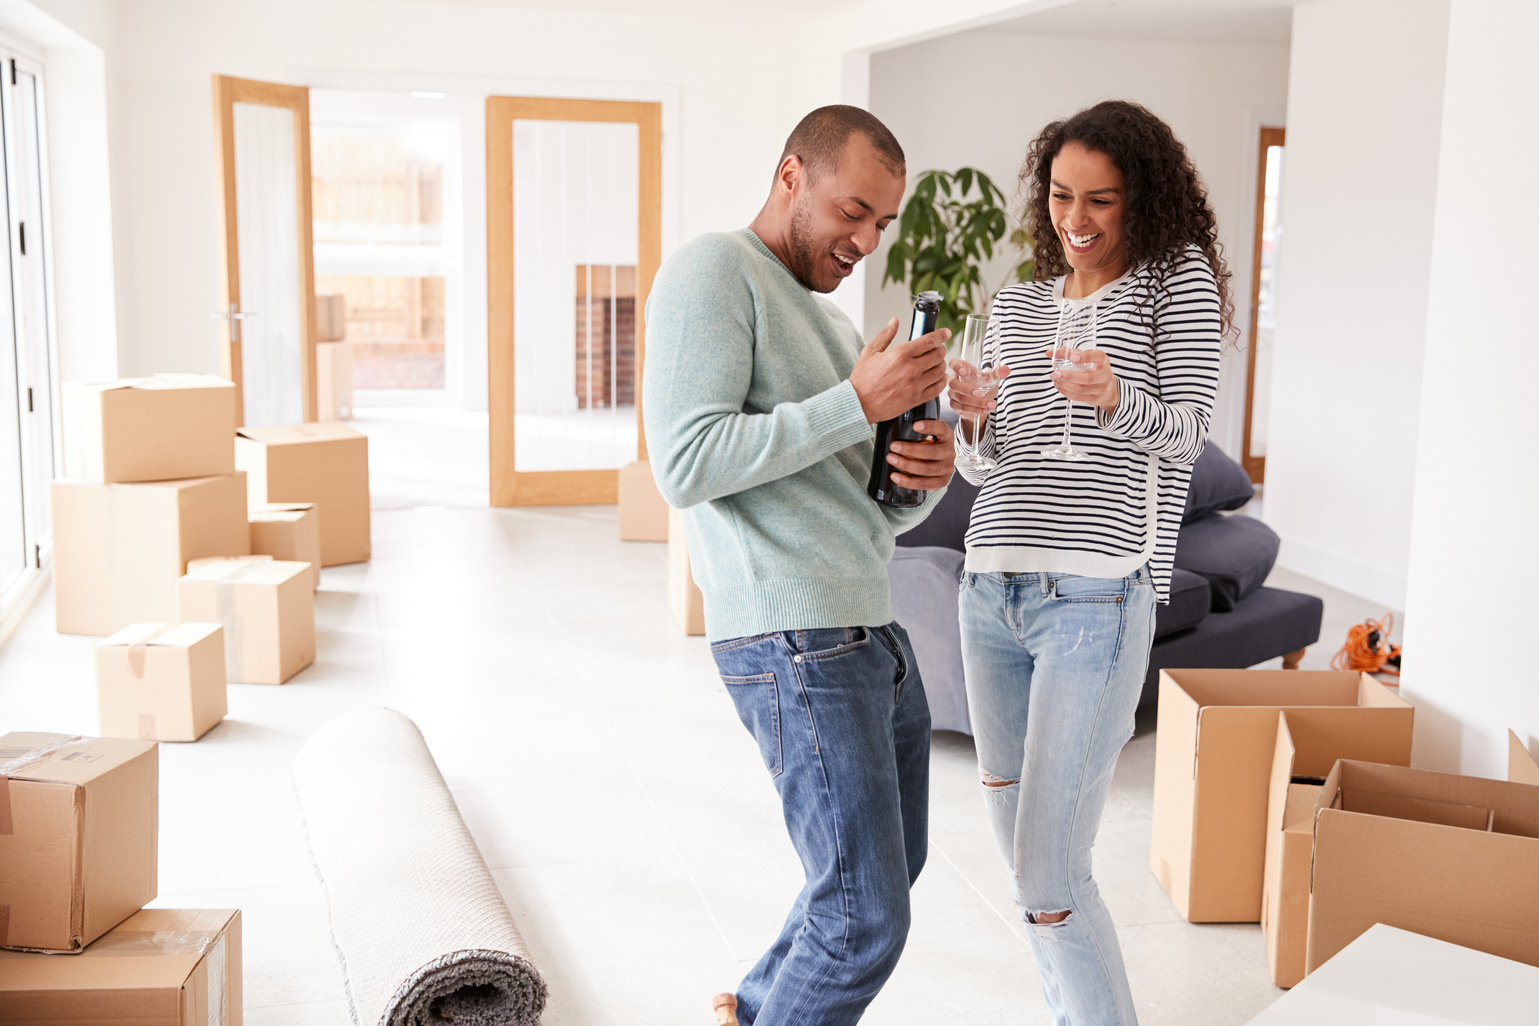 Couple Celebrating Moving into New Home